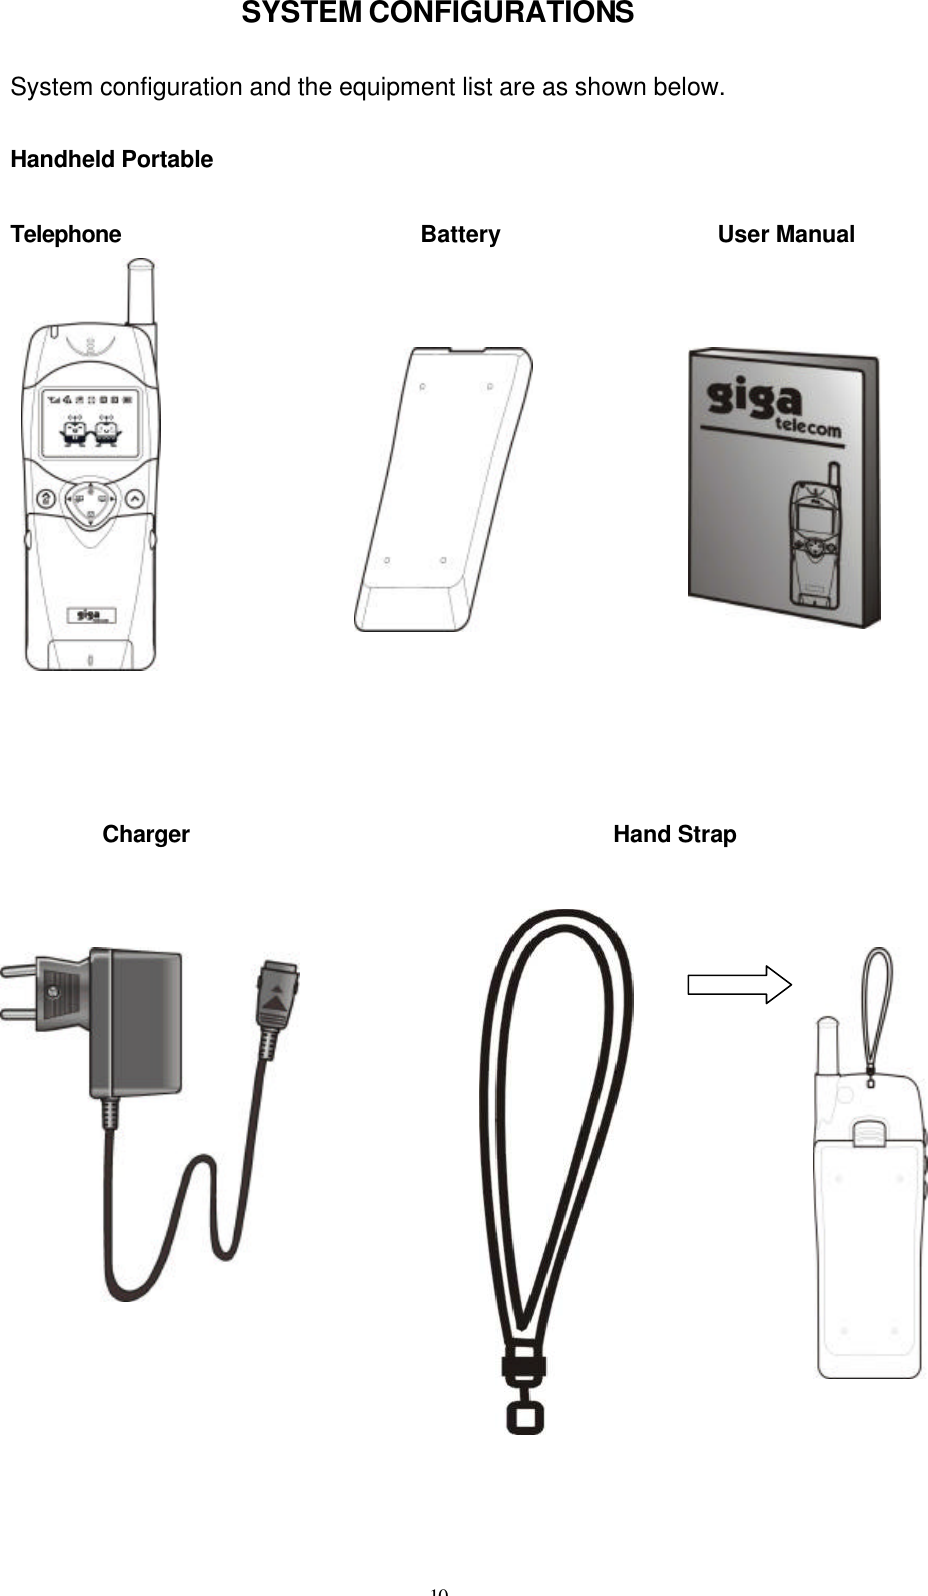 10 SYSTEM CONFIGURATIONS  System configuration and the equipment list are as shown below.  Handheld Portable  Telephone                          Battery                   User Manual        Charger                                     Hand Strap  